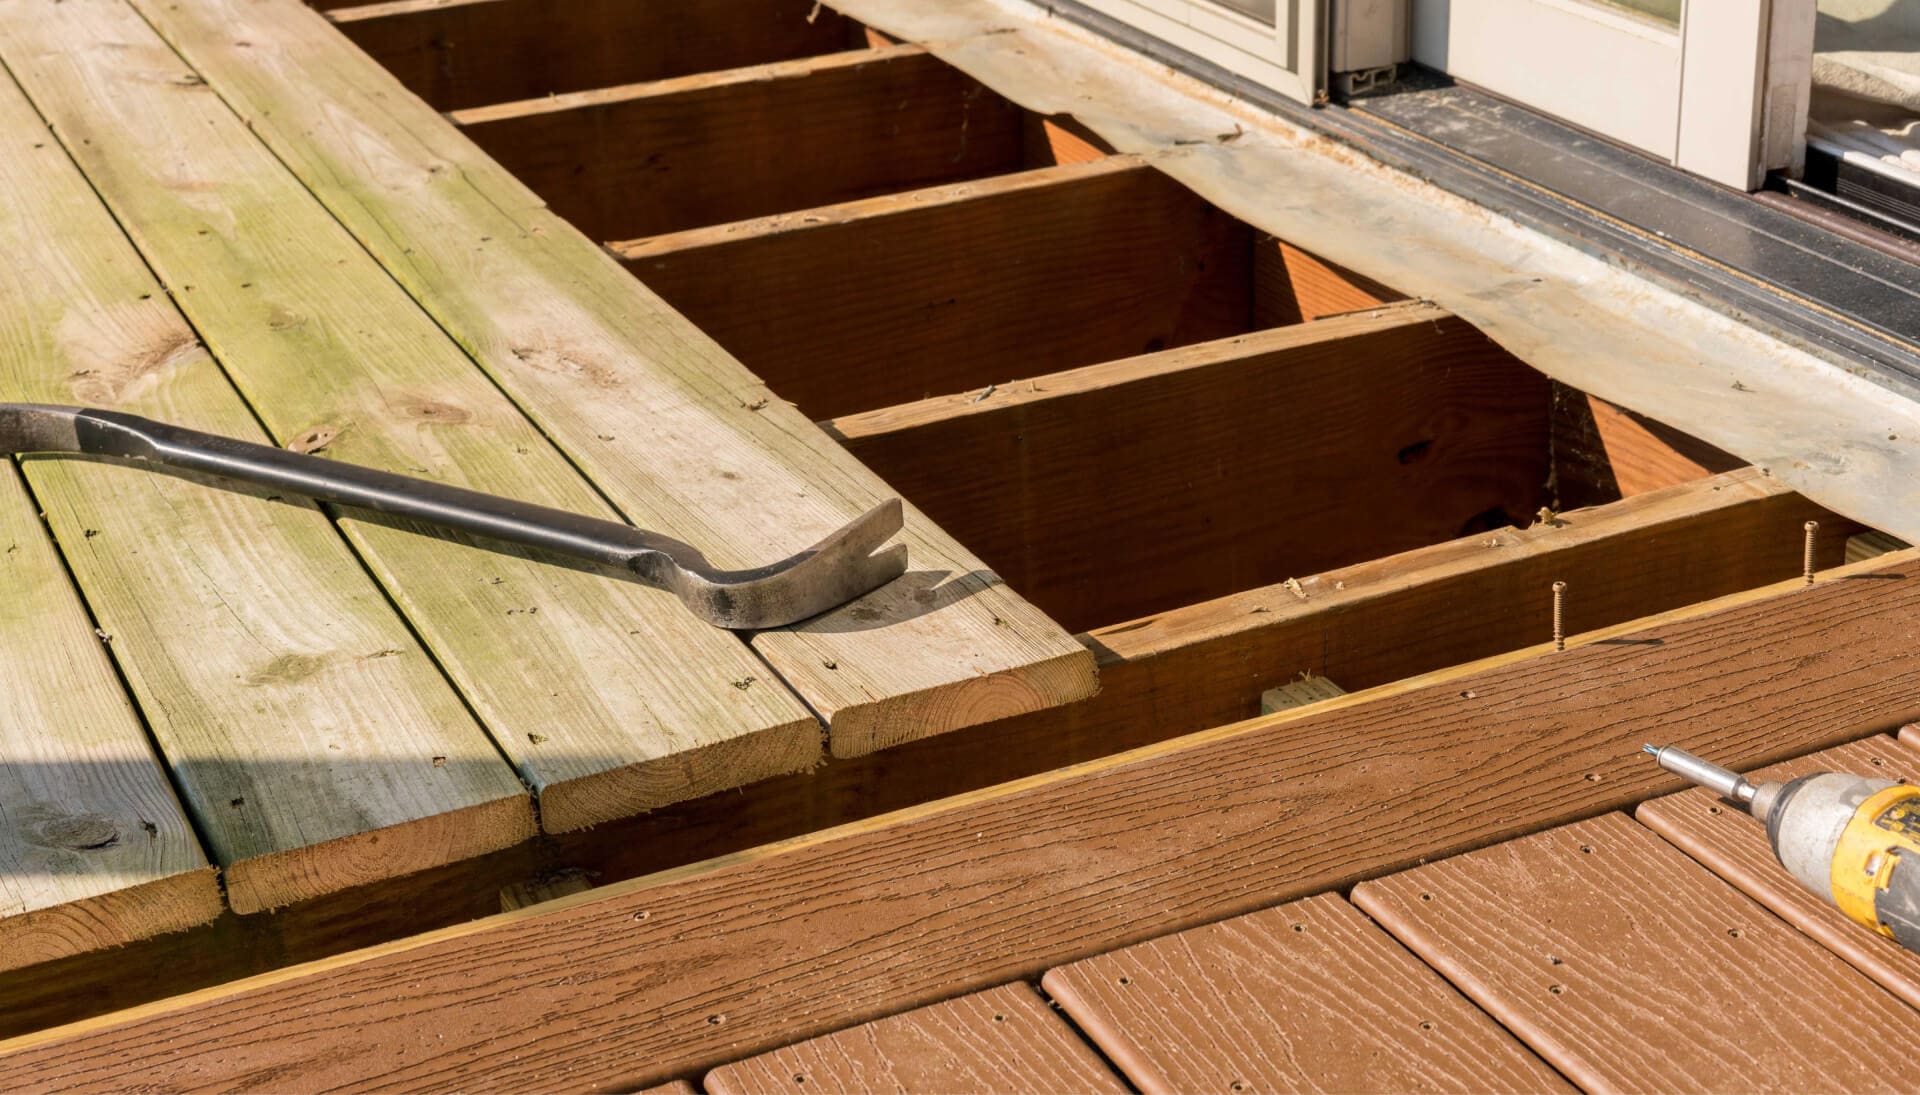 A professional deck repair service in Winston Salem, providing thorough inspections and maintenance to ensure the safety and durability of the structure